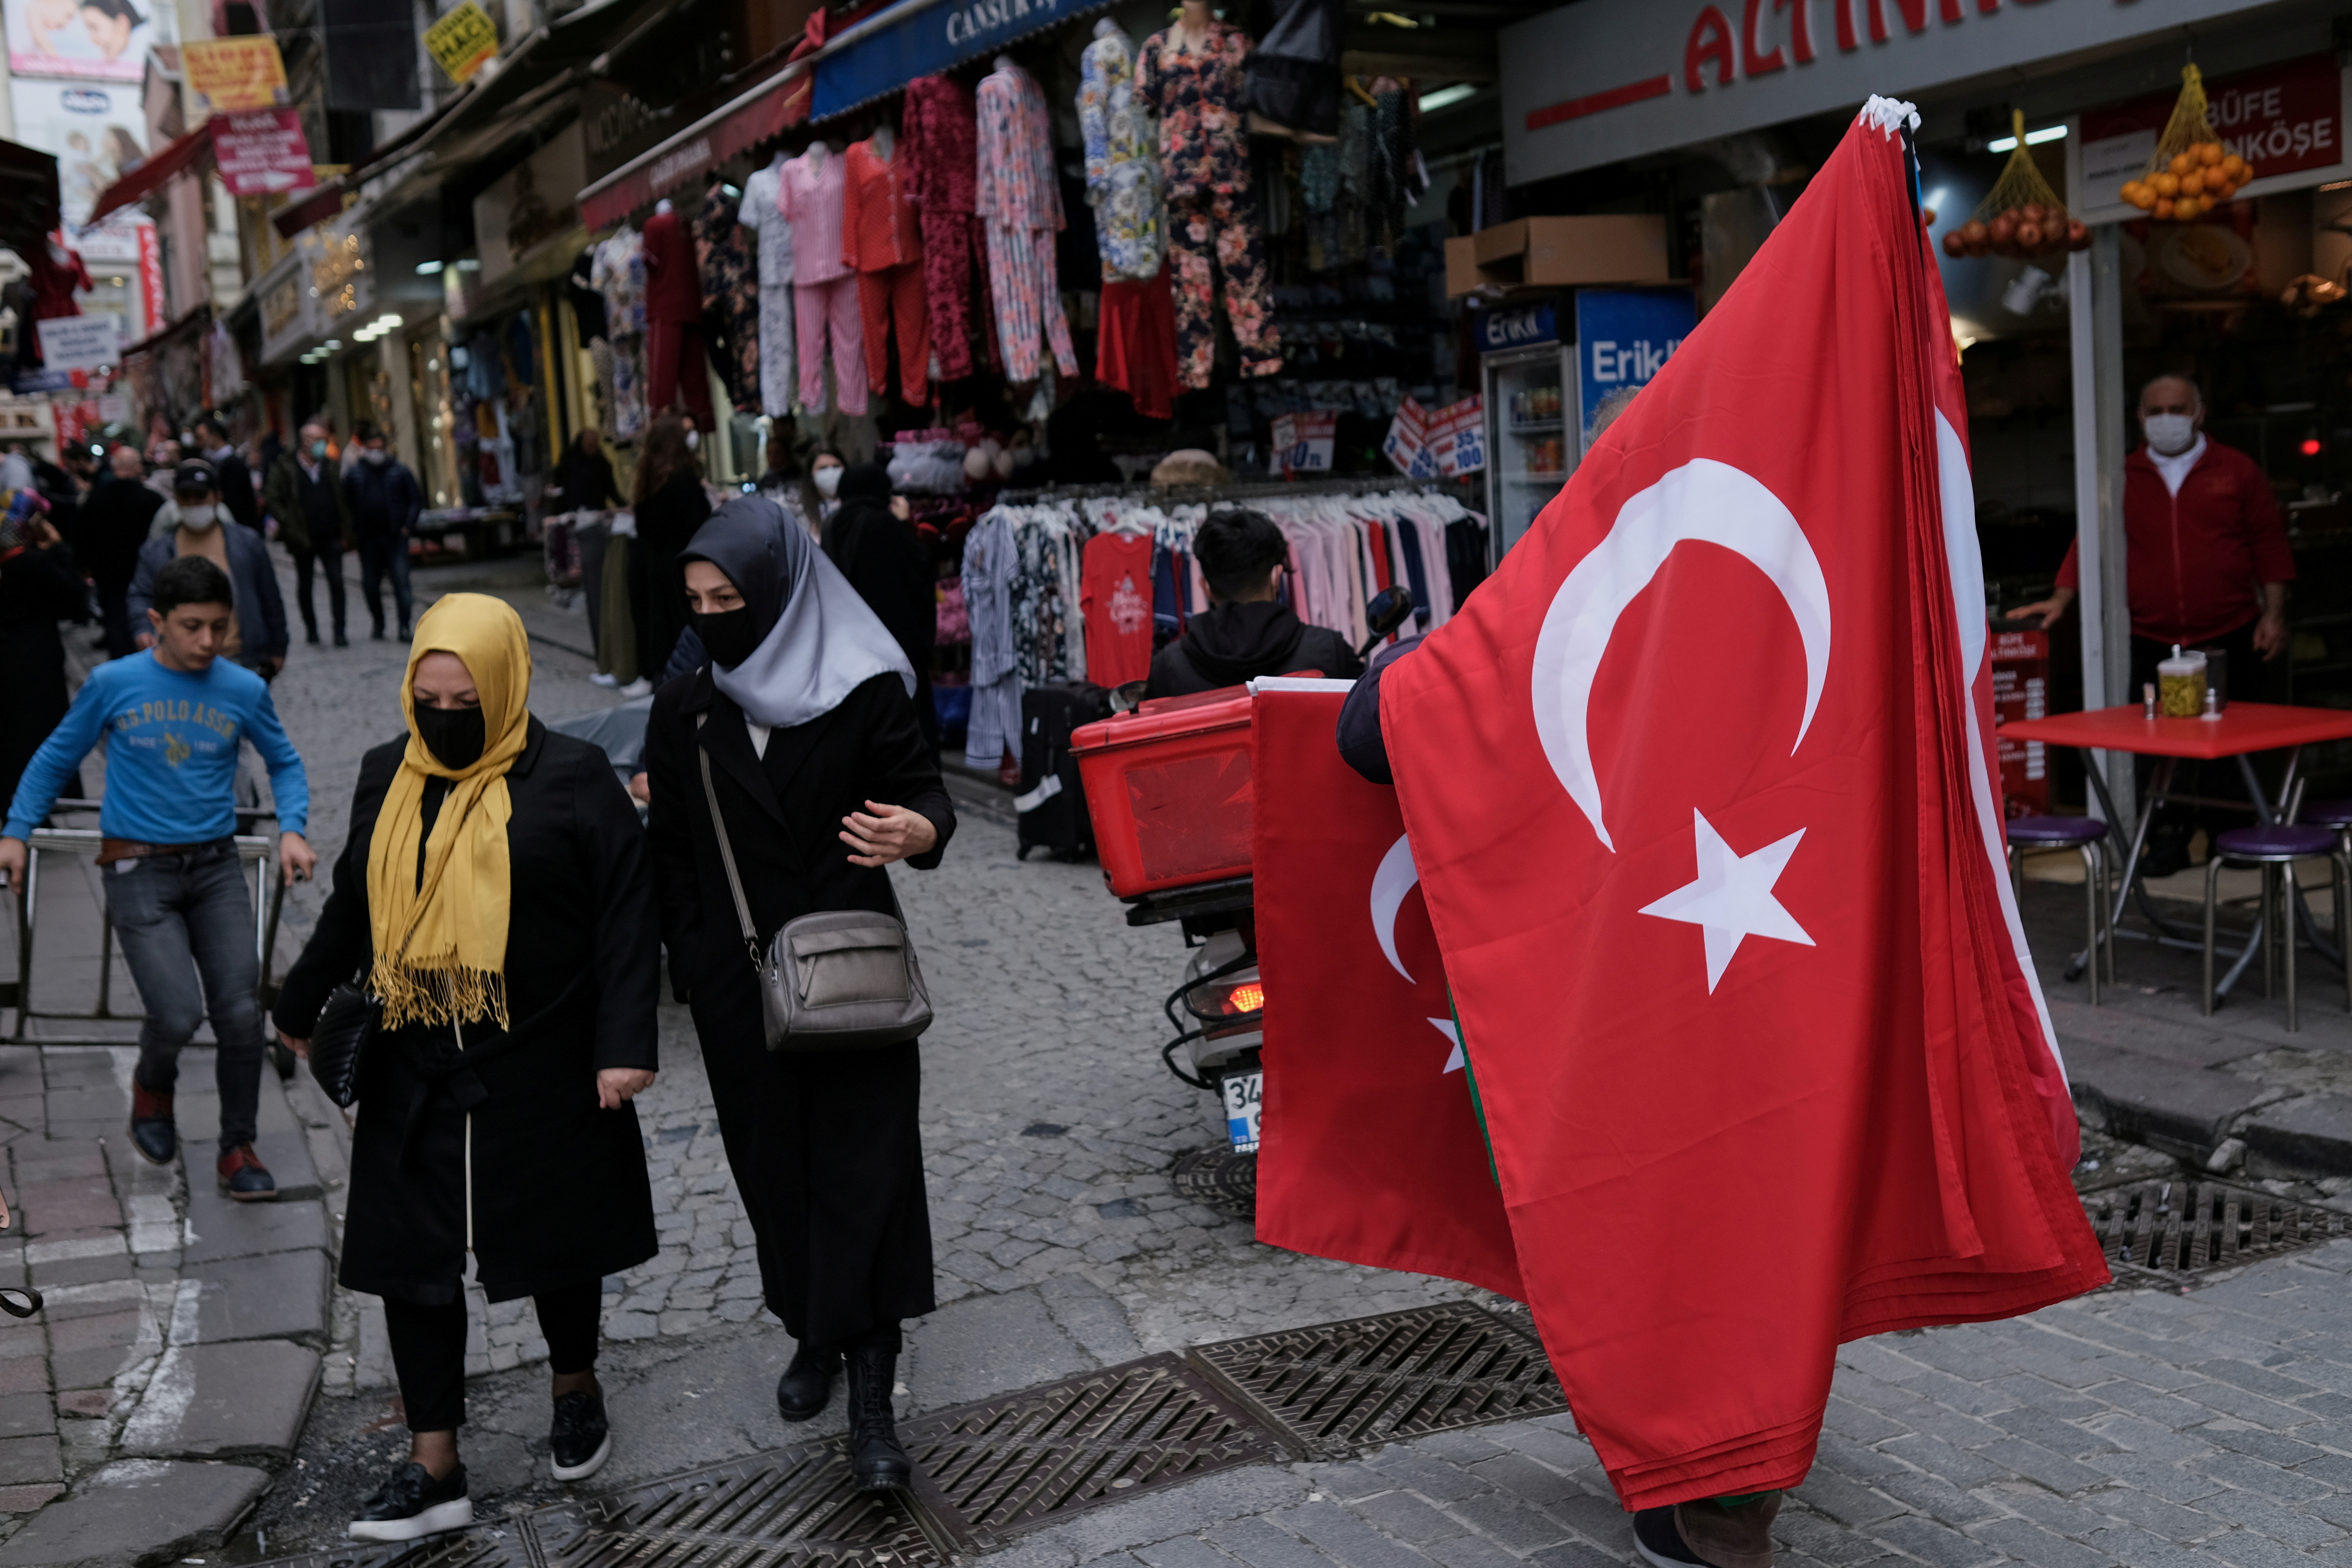 A street vendor sells Turkish national flags at Mahmutpasa street, a popular middle-class shopping district, in Istanbul, Turkey March 22, 2021. REUTERS/Murad Sezer/File Photo